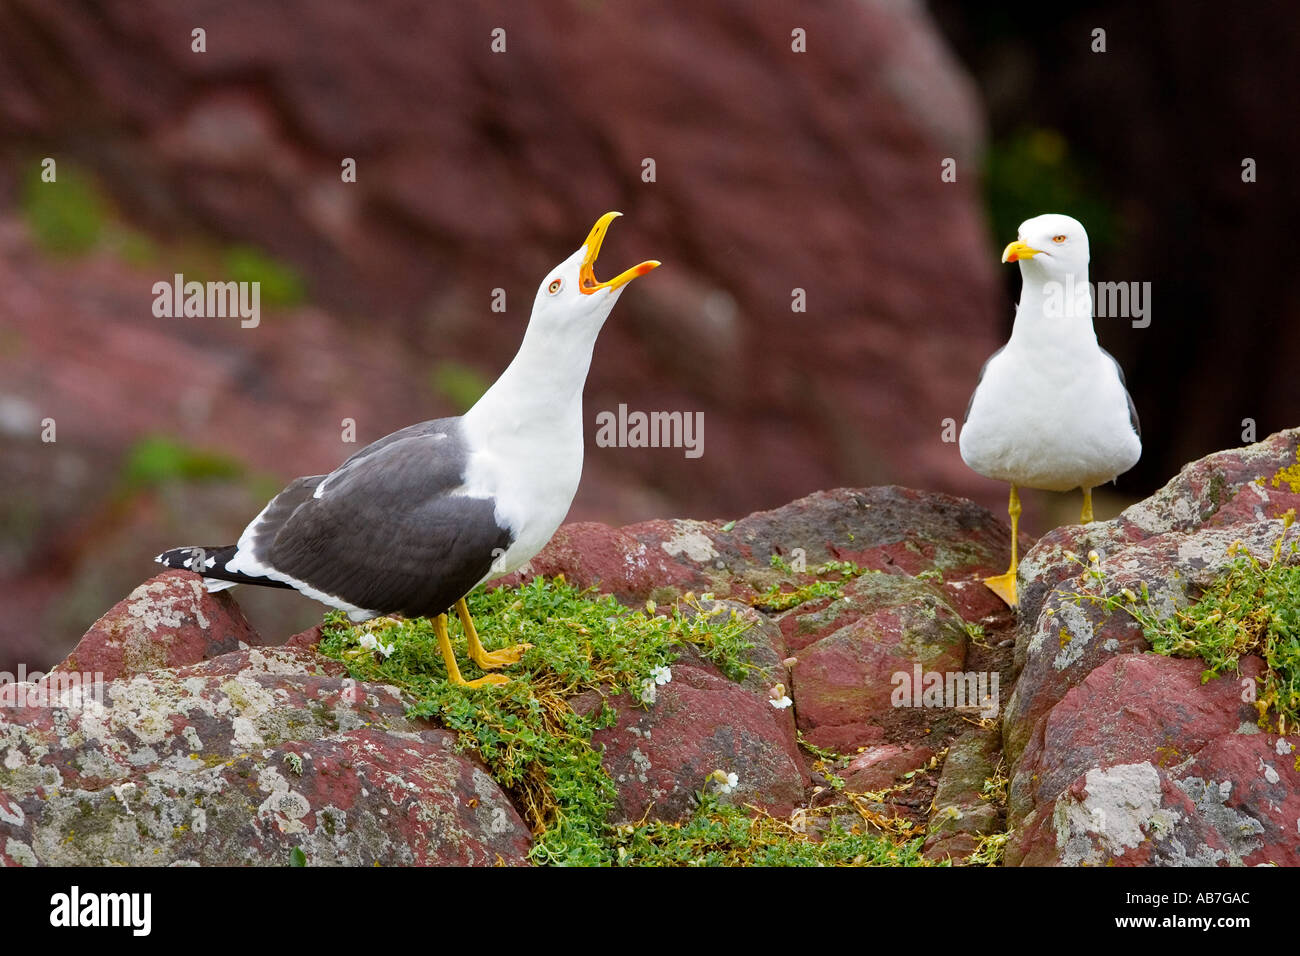 Two Lesser black backed gulls Larus fuscus standing on rock with one neck outstretched calling skokholm Stock Photo